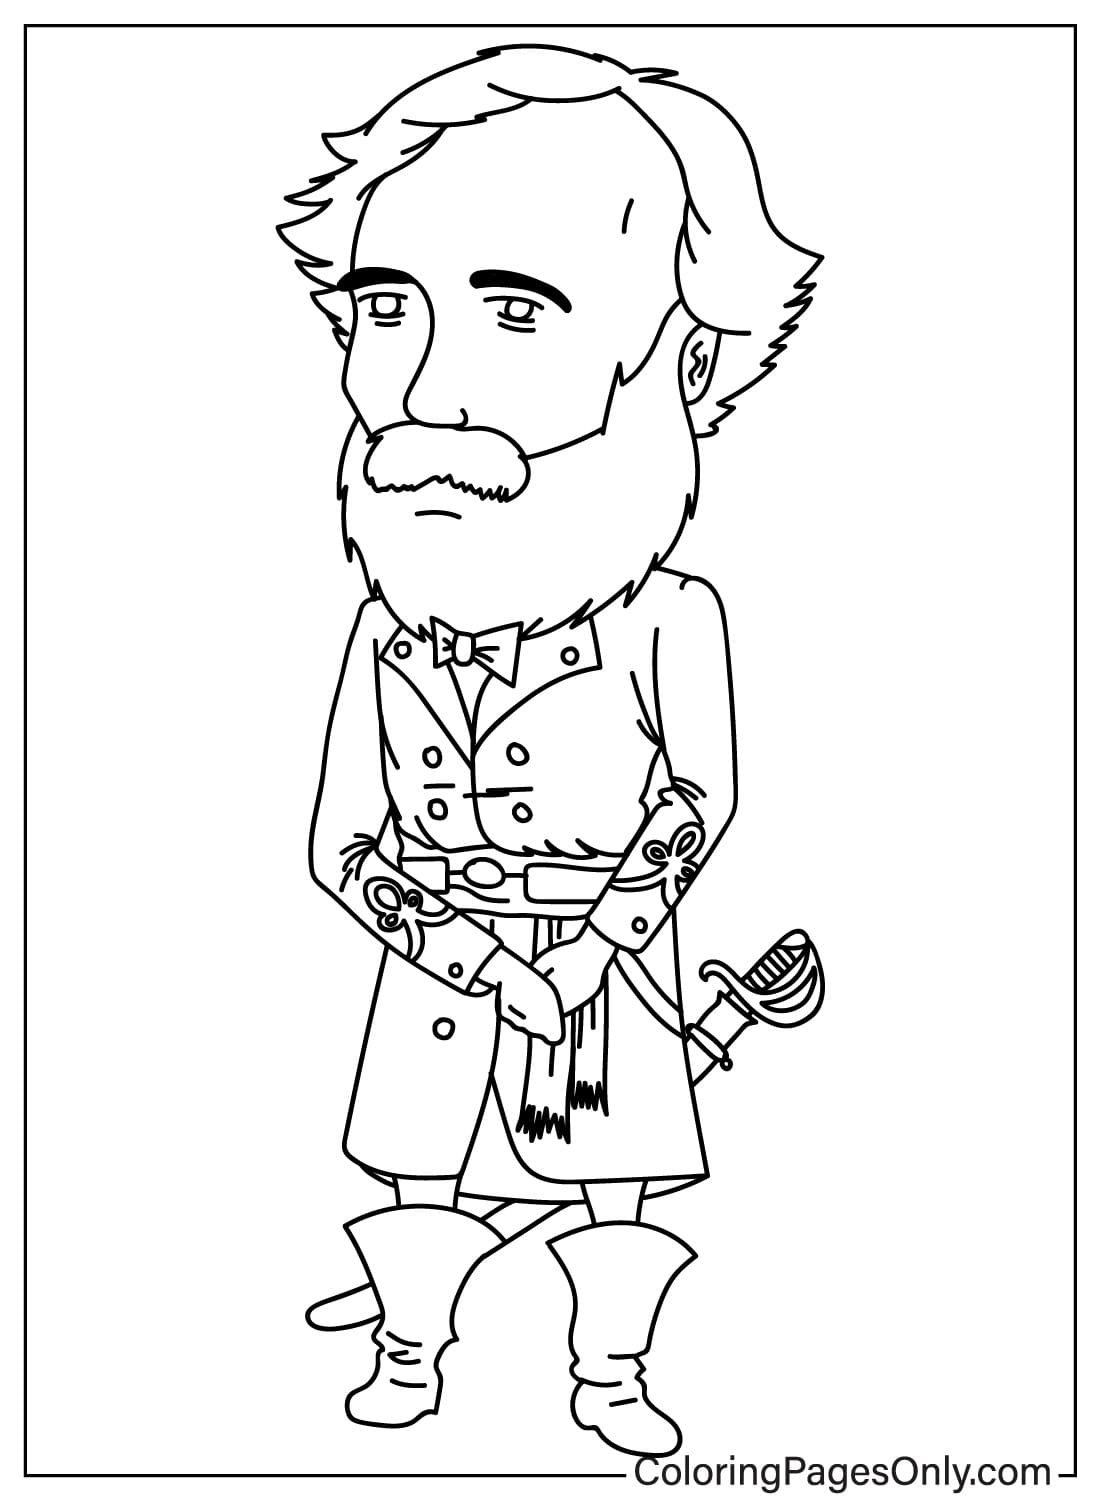 Chibi Robert E. Lee Coloring Page from Robert E. Lee